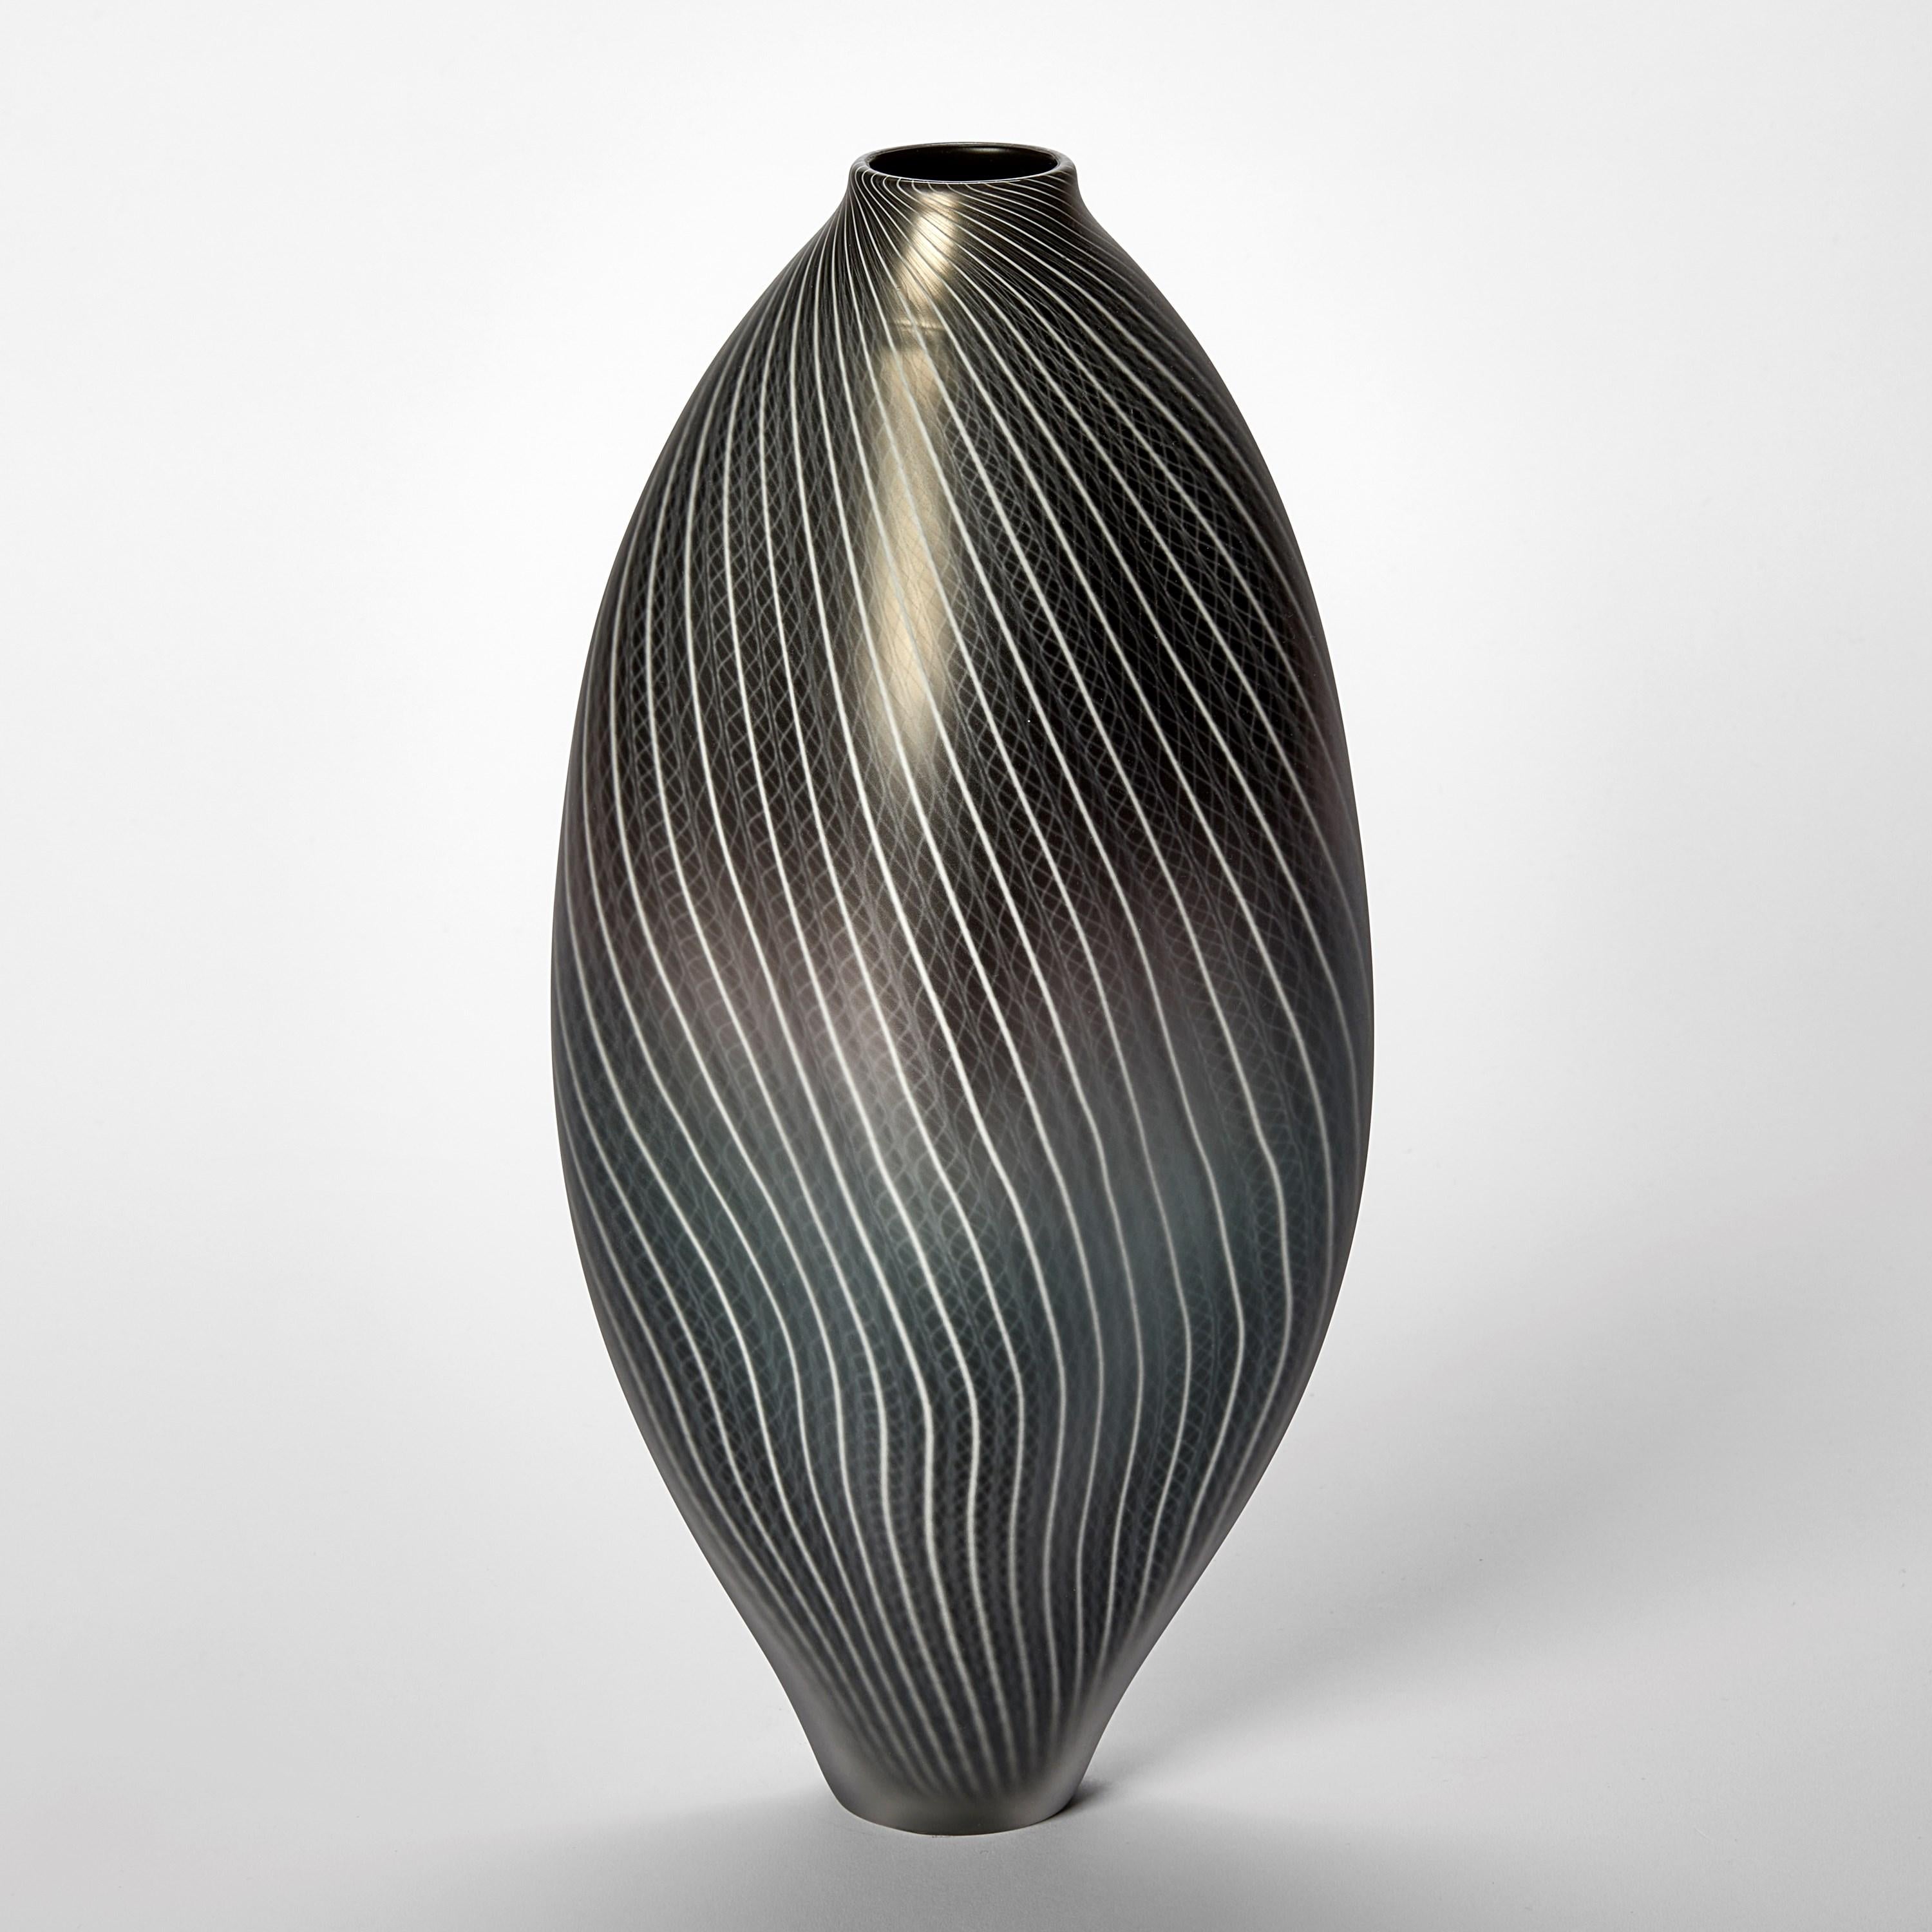 'Stratiform 2.1.001' is a unique glass vessel with fine filigree cane detail by the British artist, Liam Reeves. 

Liam Reeves has been making glass professionally since 1998 when he graduated from Middlesex University with a BA (Hons) in